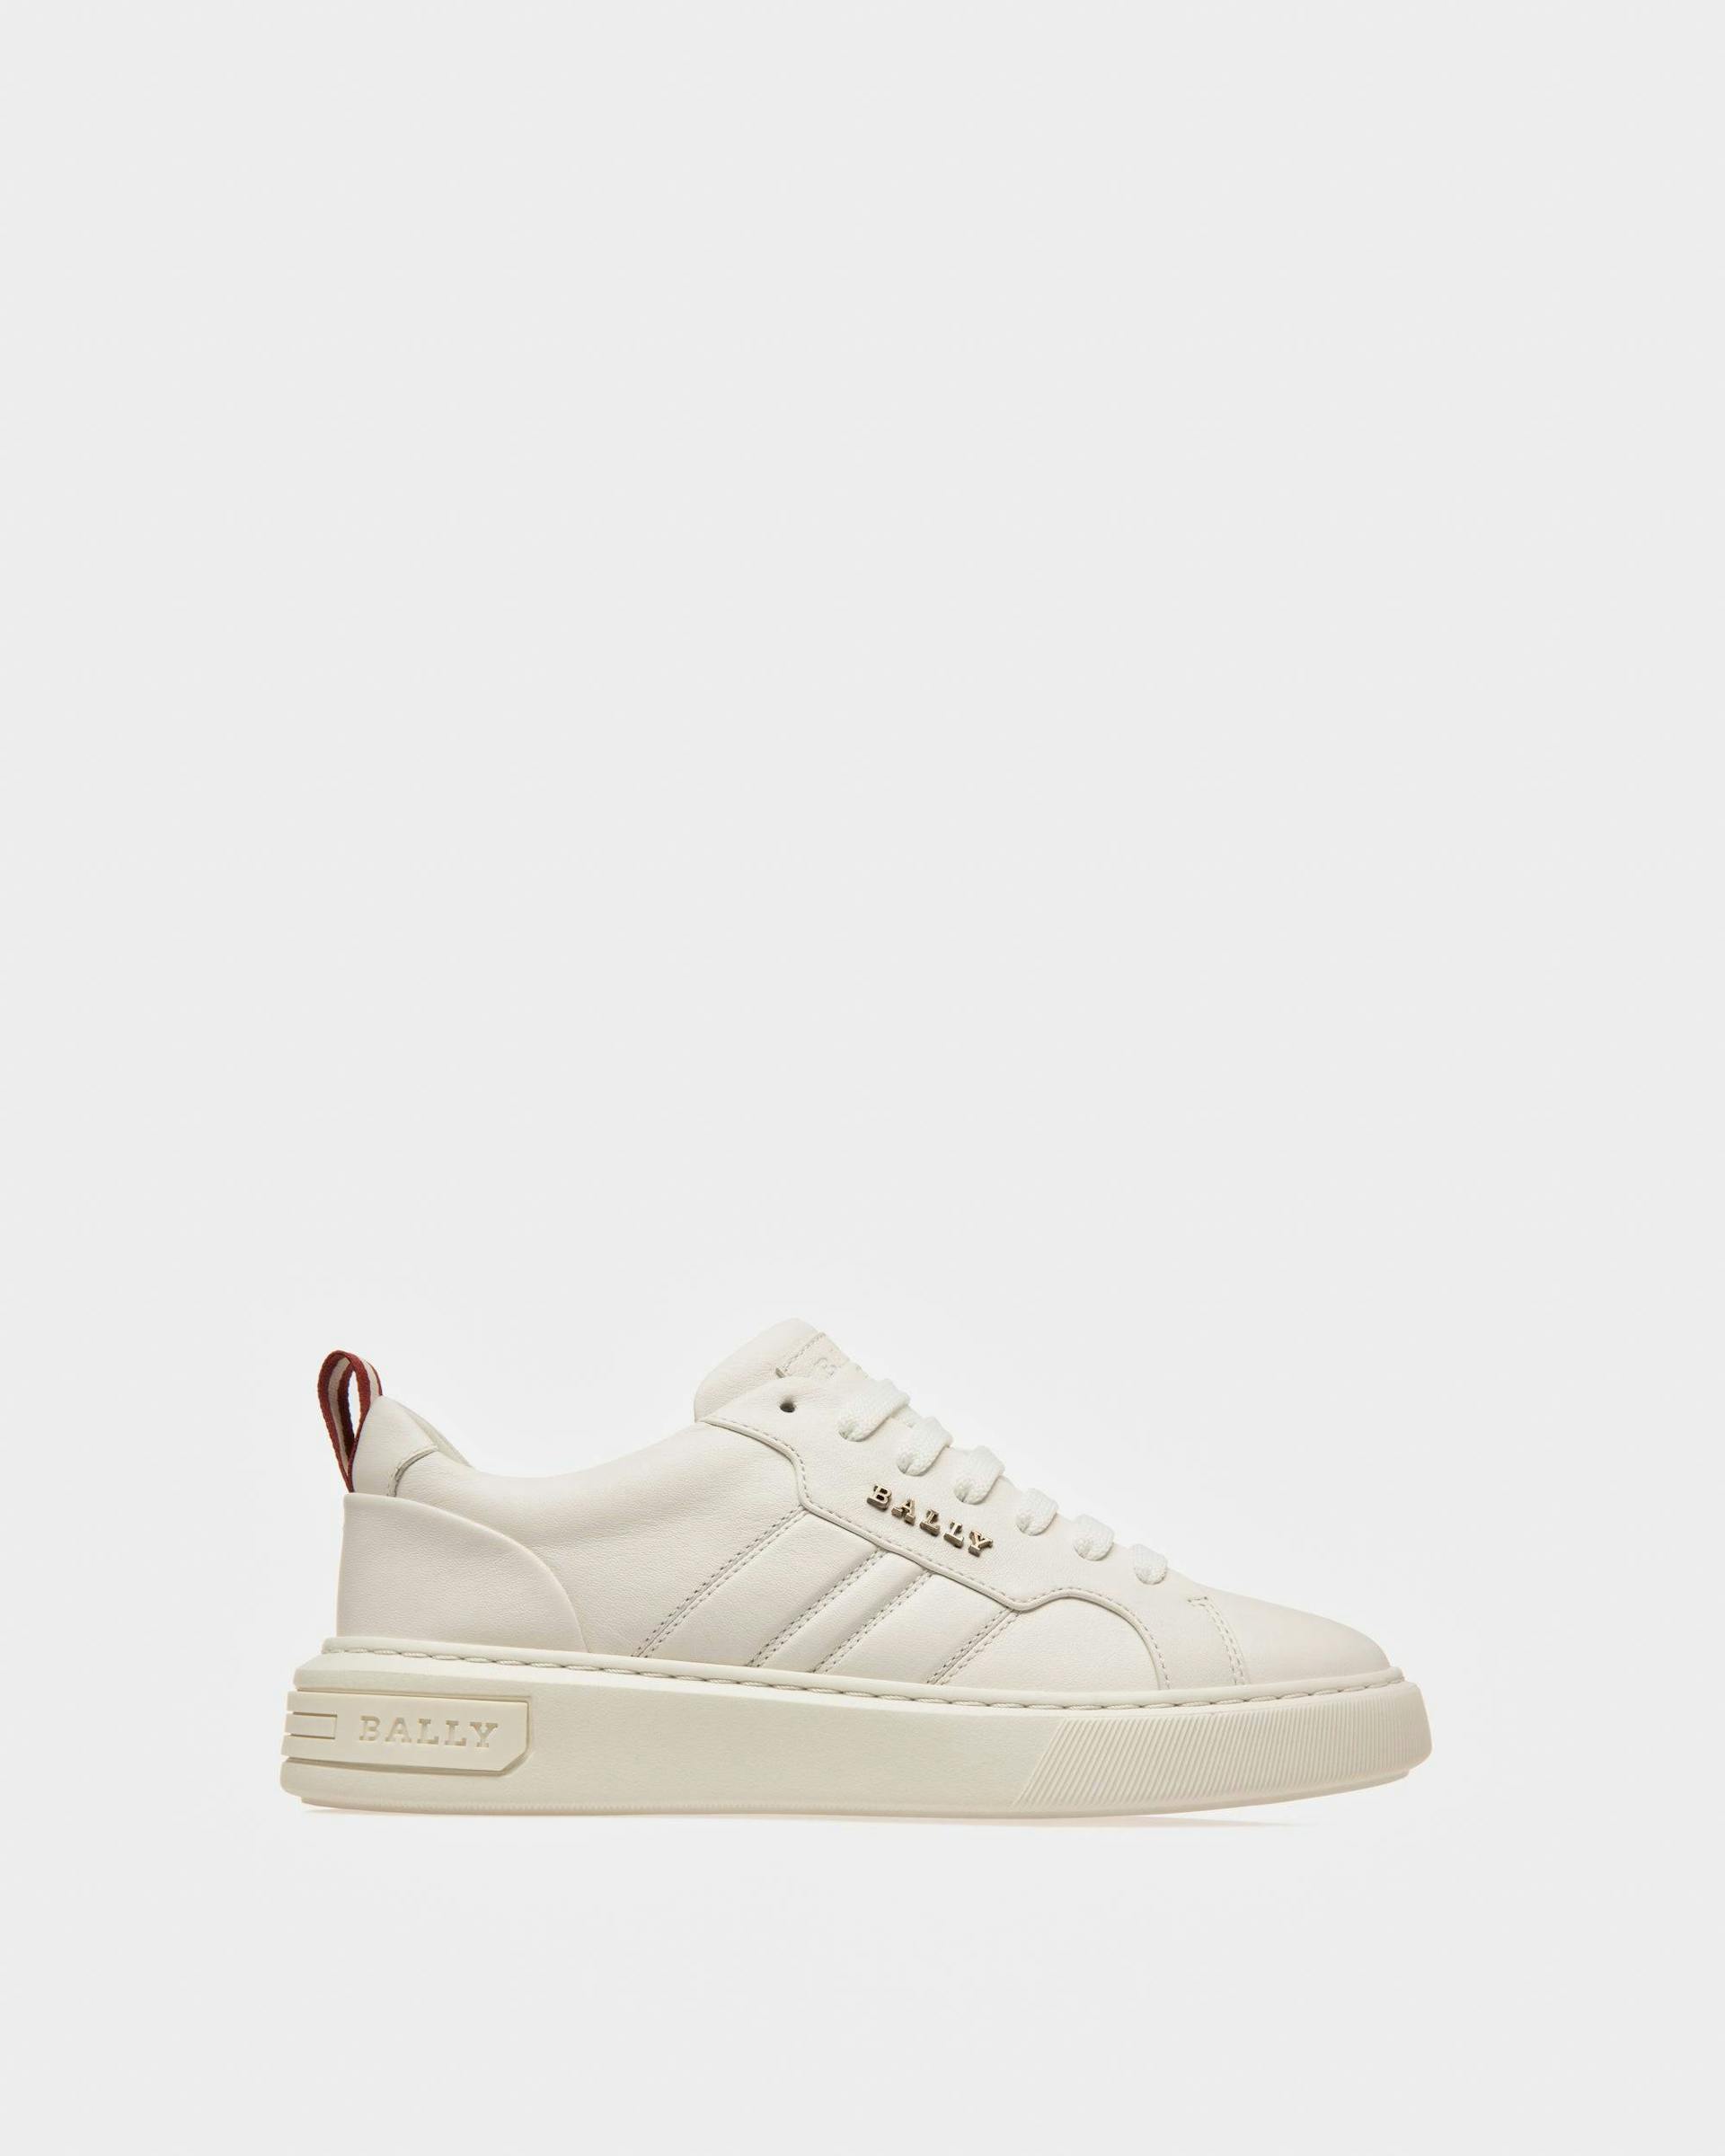 Maxim Leather Sneakers In White - Women's - Bally - 01